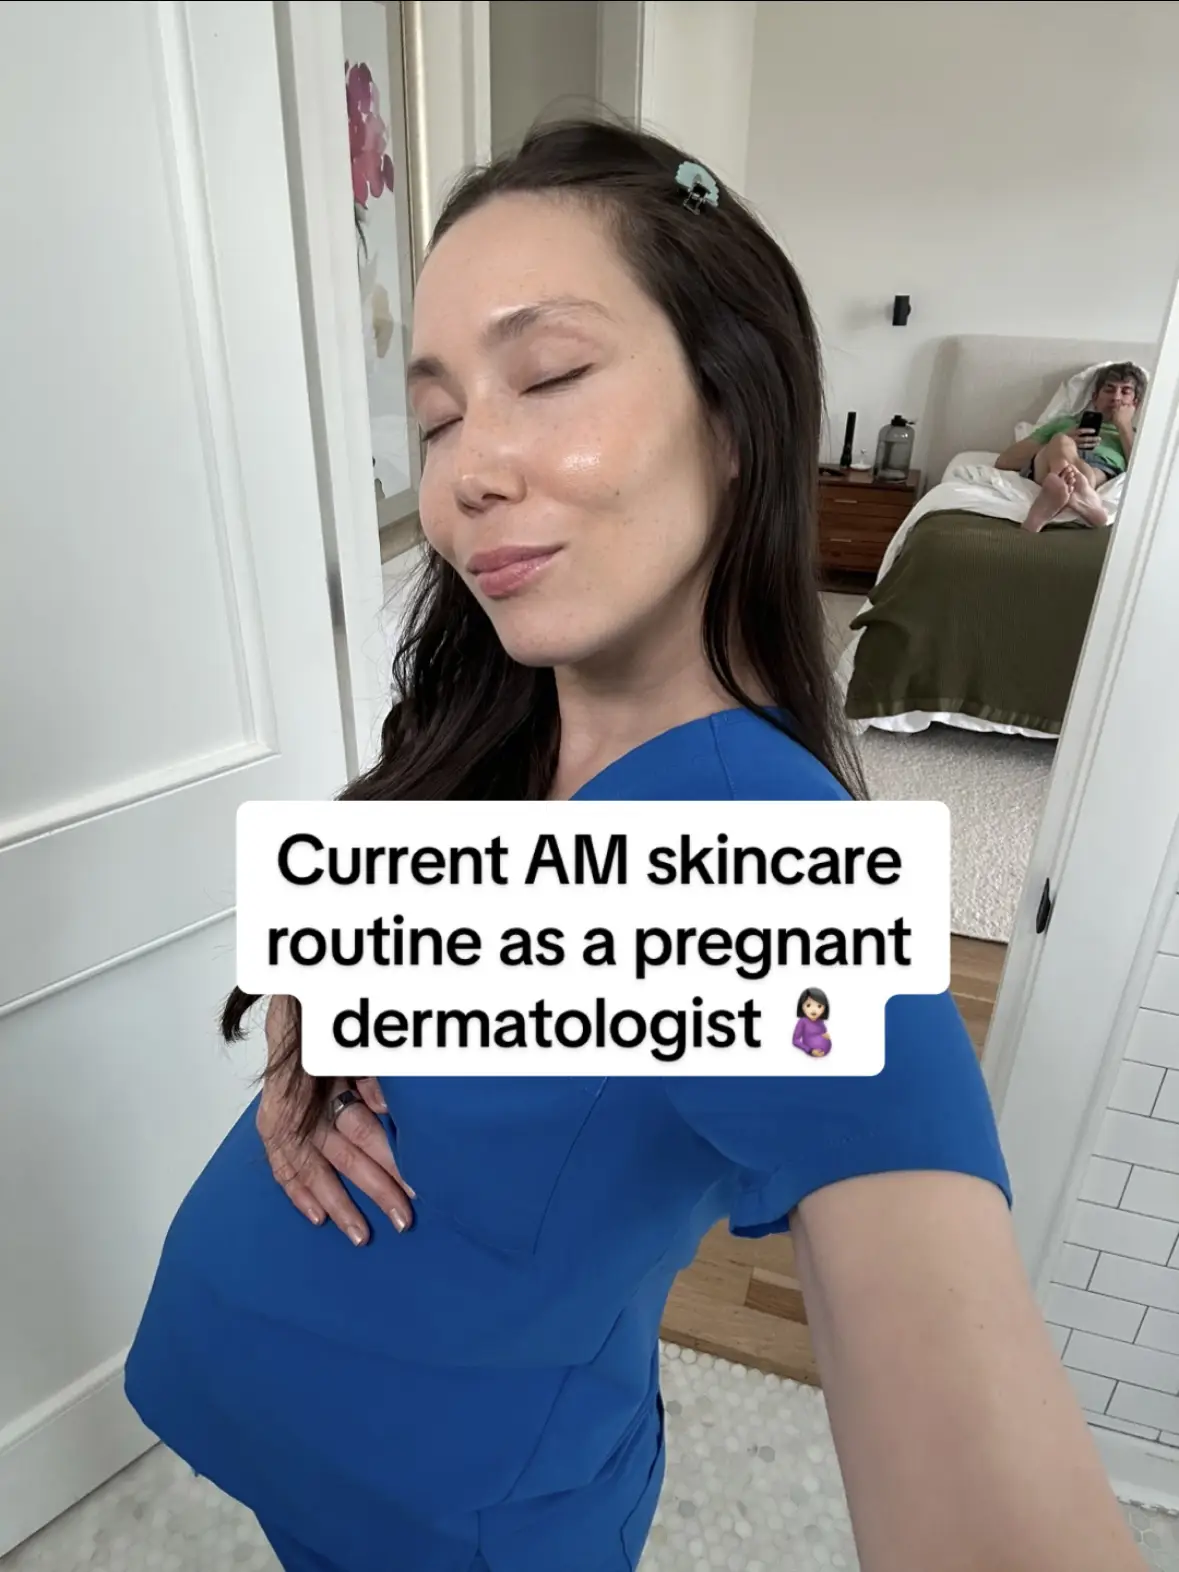 DIY Fashion Influencer Mimi G on Miscarriage at 4 Months Pregnant